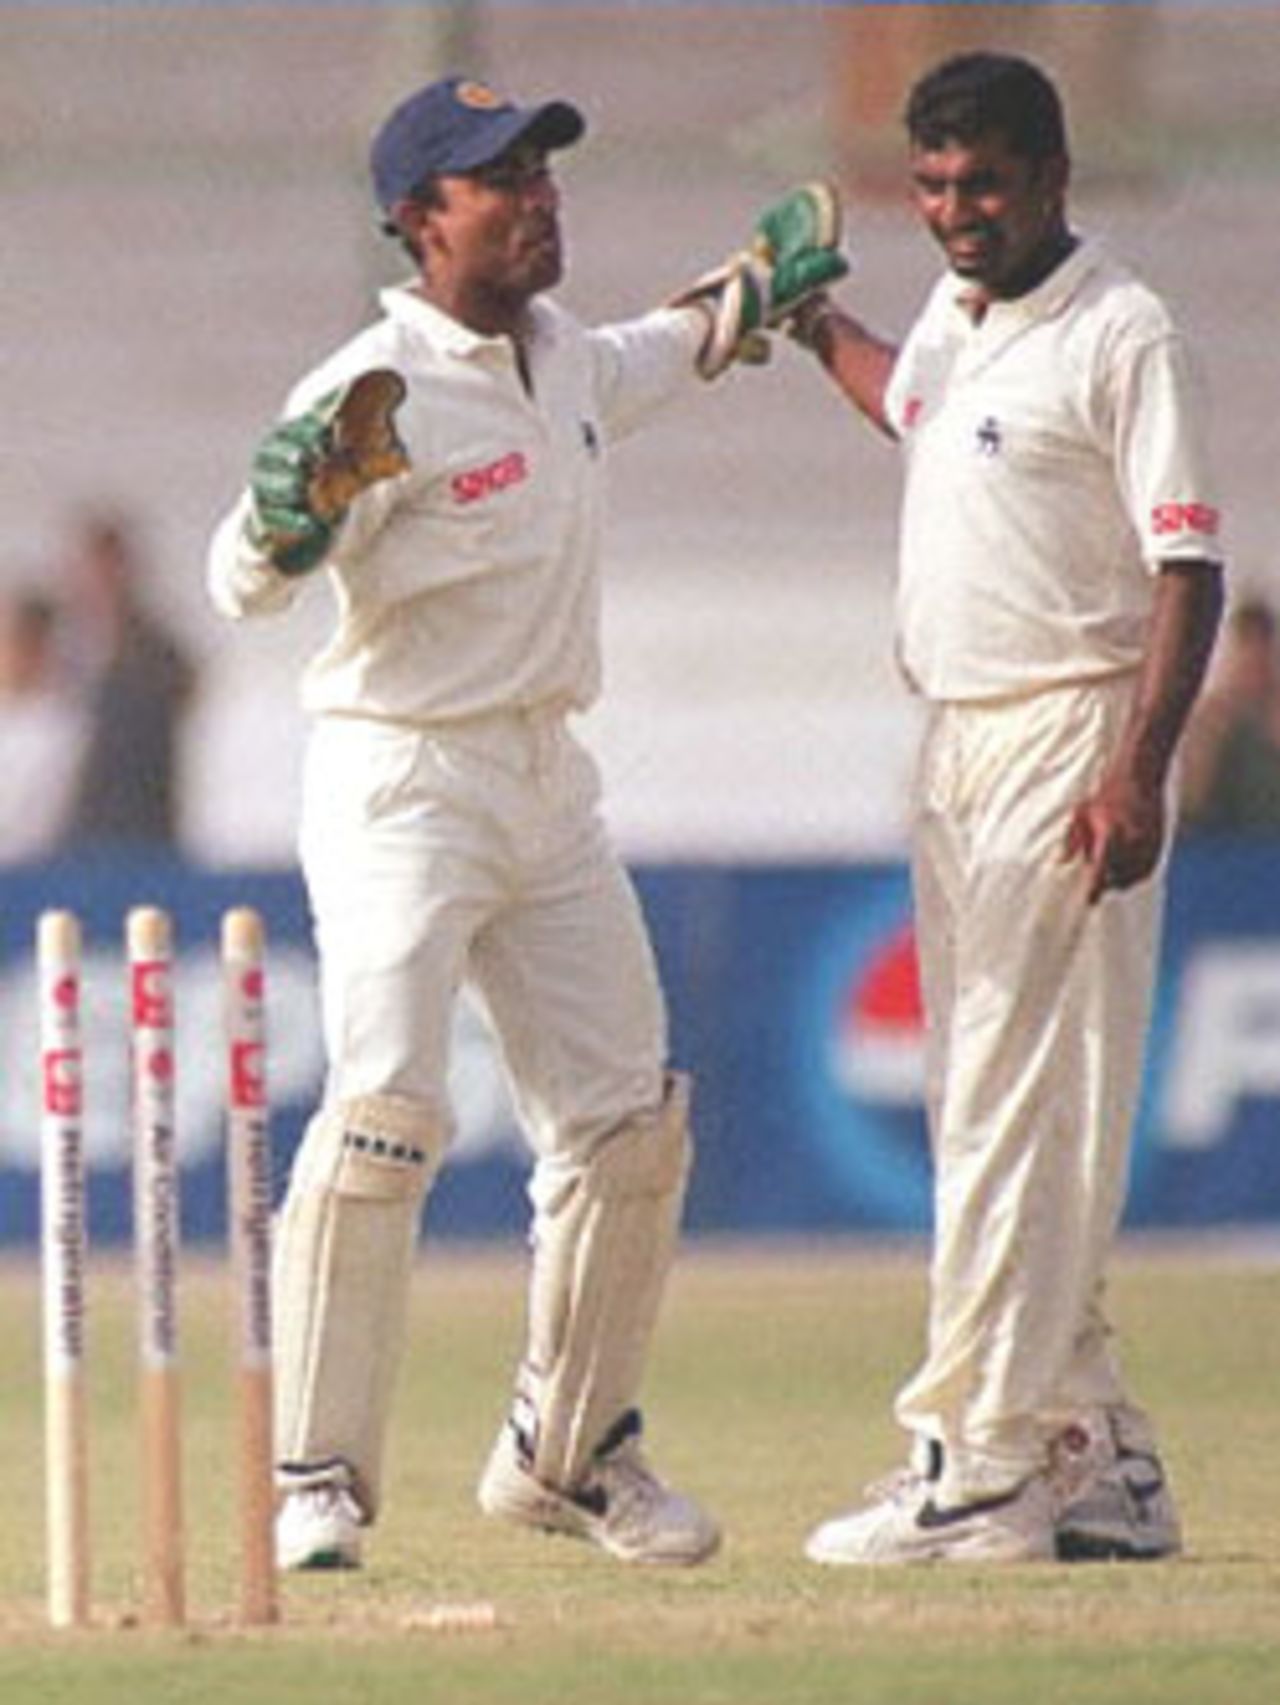 Sri Lankan spinner Muttia Murlitharan (R) celebrates with wicketkeeper Romesh Kaluwitharana after taking his fourth wicket of the inning in Karachi 12 March 2000 during the first day of the third Test against Pakistan. Murlitharan took 4-89 in the first inning.